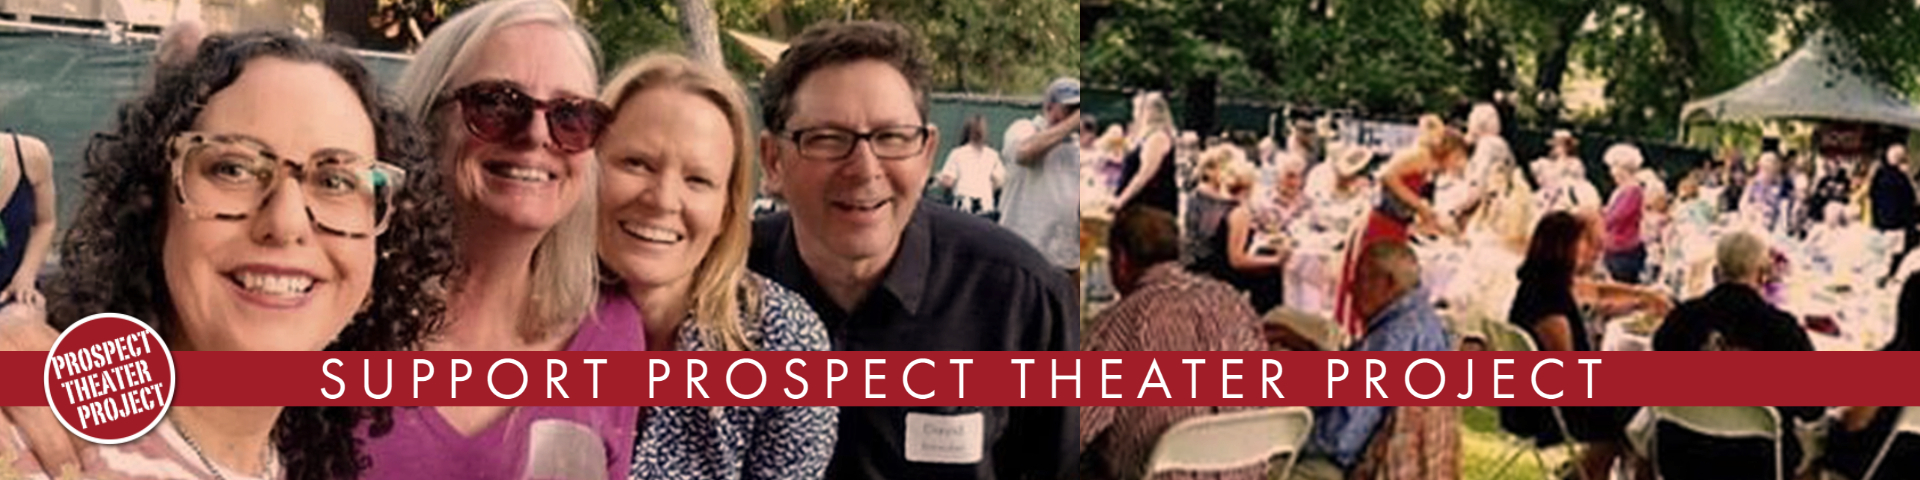 donors enjoying a fundraising event to support prospect theater project